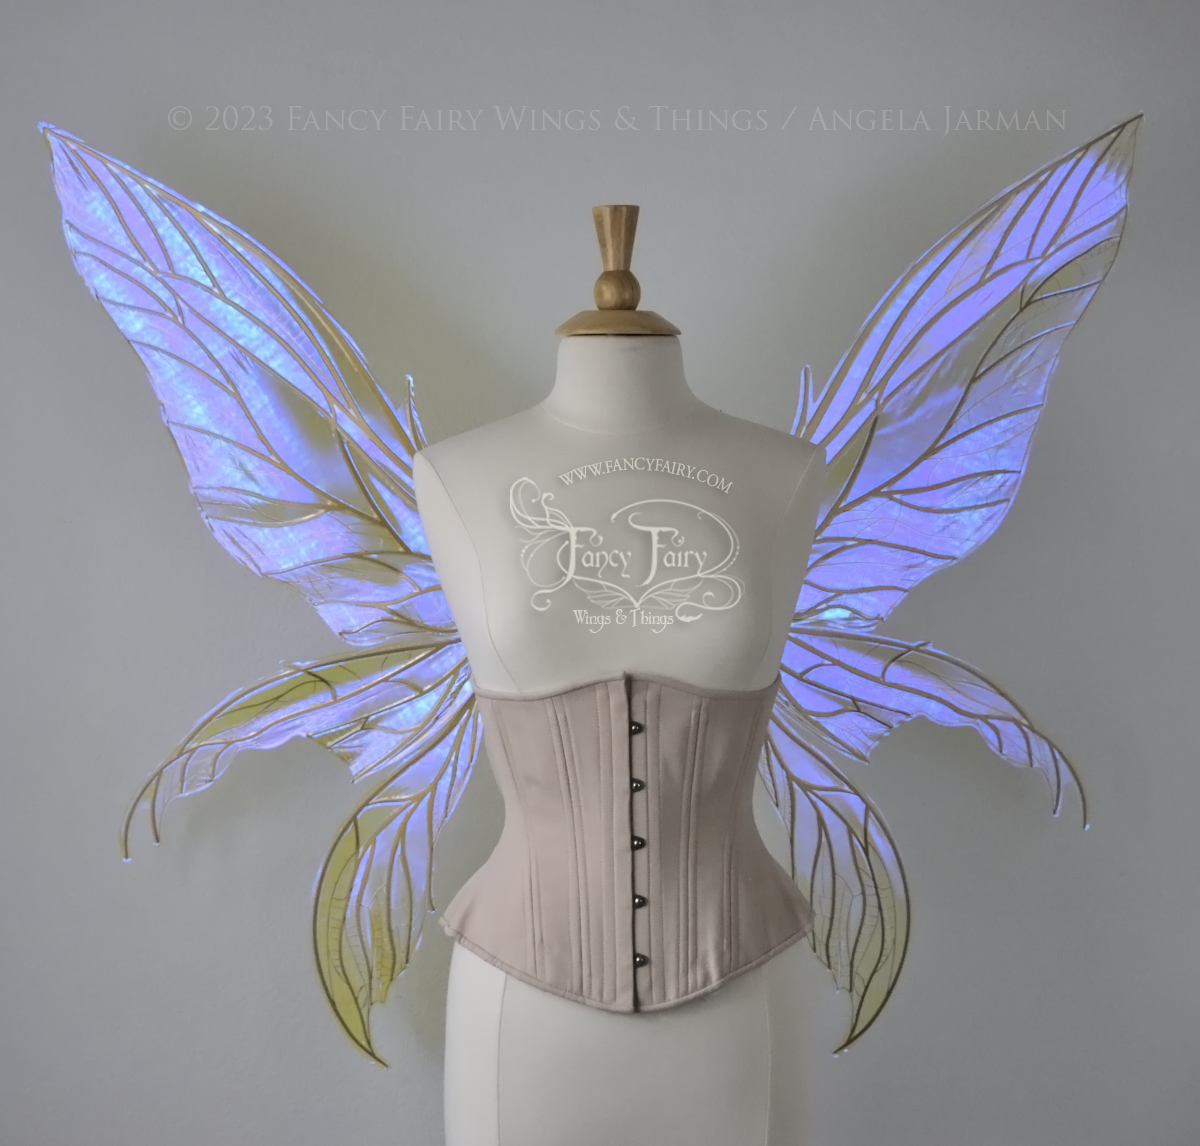 Front view of an ivory dress form wearing an alabaster underbust corset & large violet iridescent fairy wings. Upper panels are elongated with pointed tips, 2 lower panels curve downward, lots of thin vein detail in gold